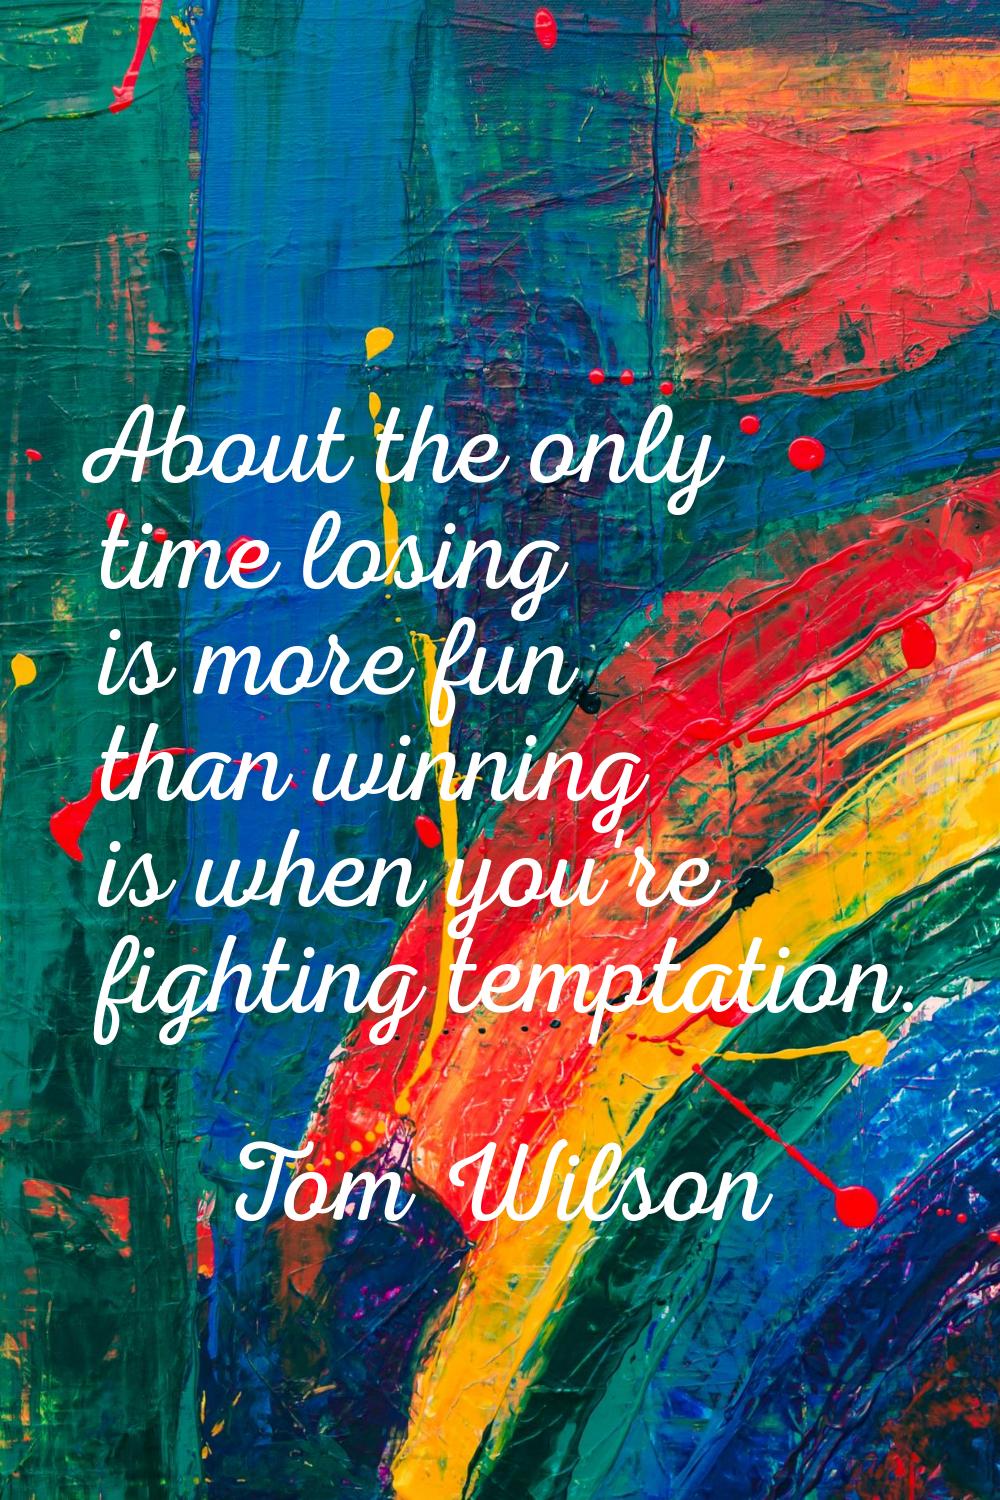 About the only time losing is more fun than winning is when you're fighting temptation.